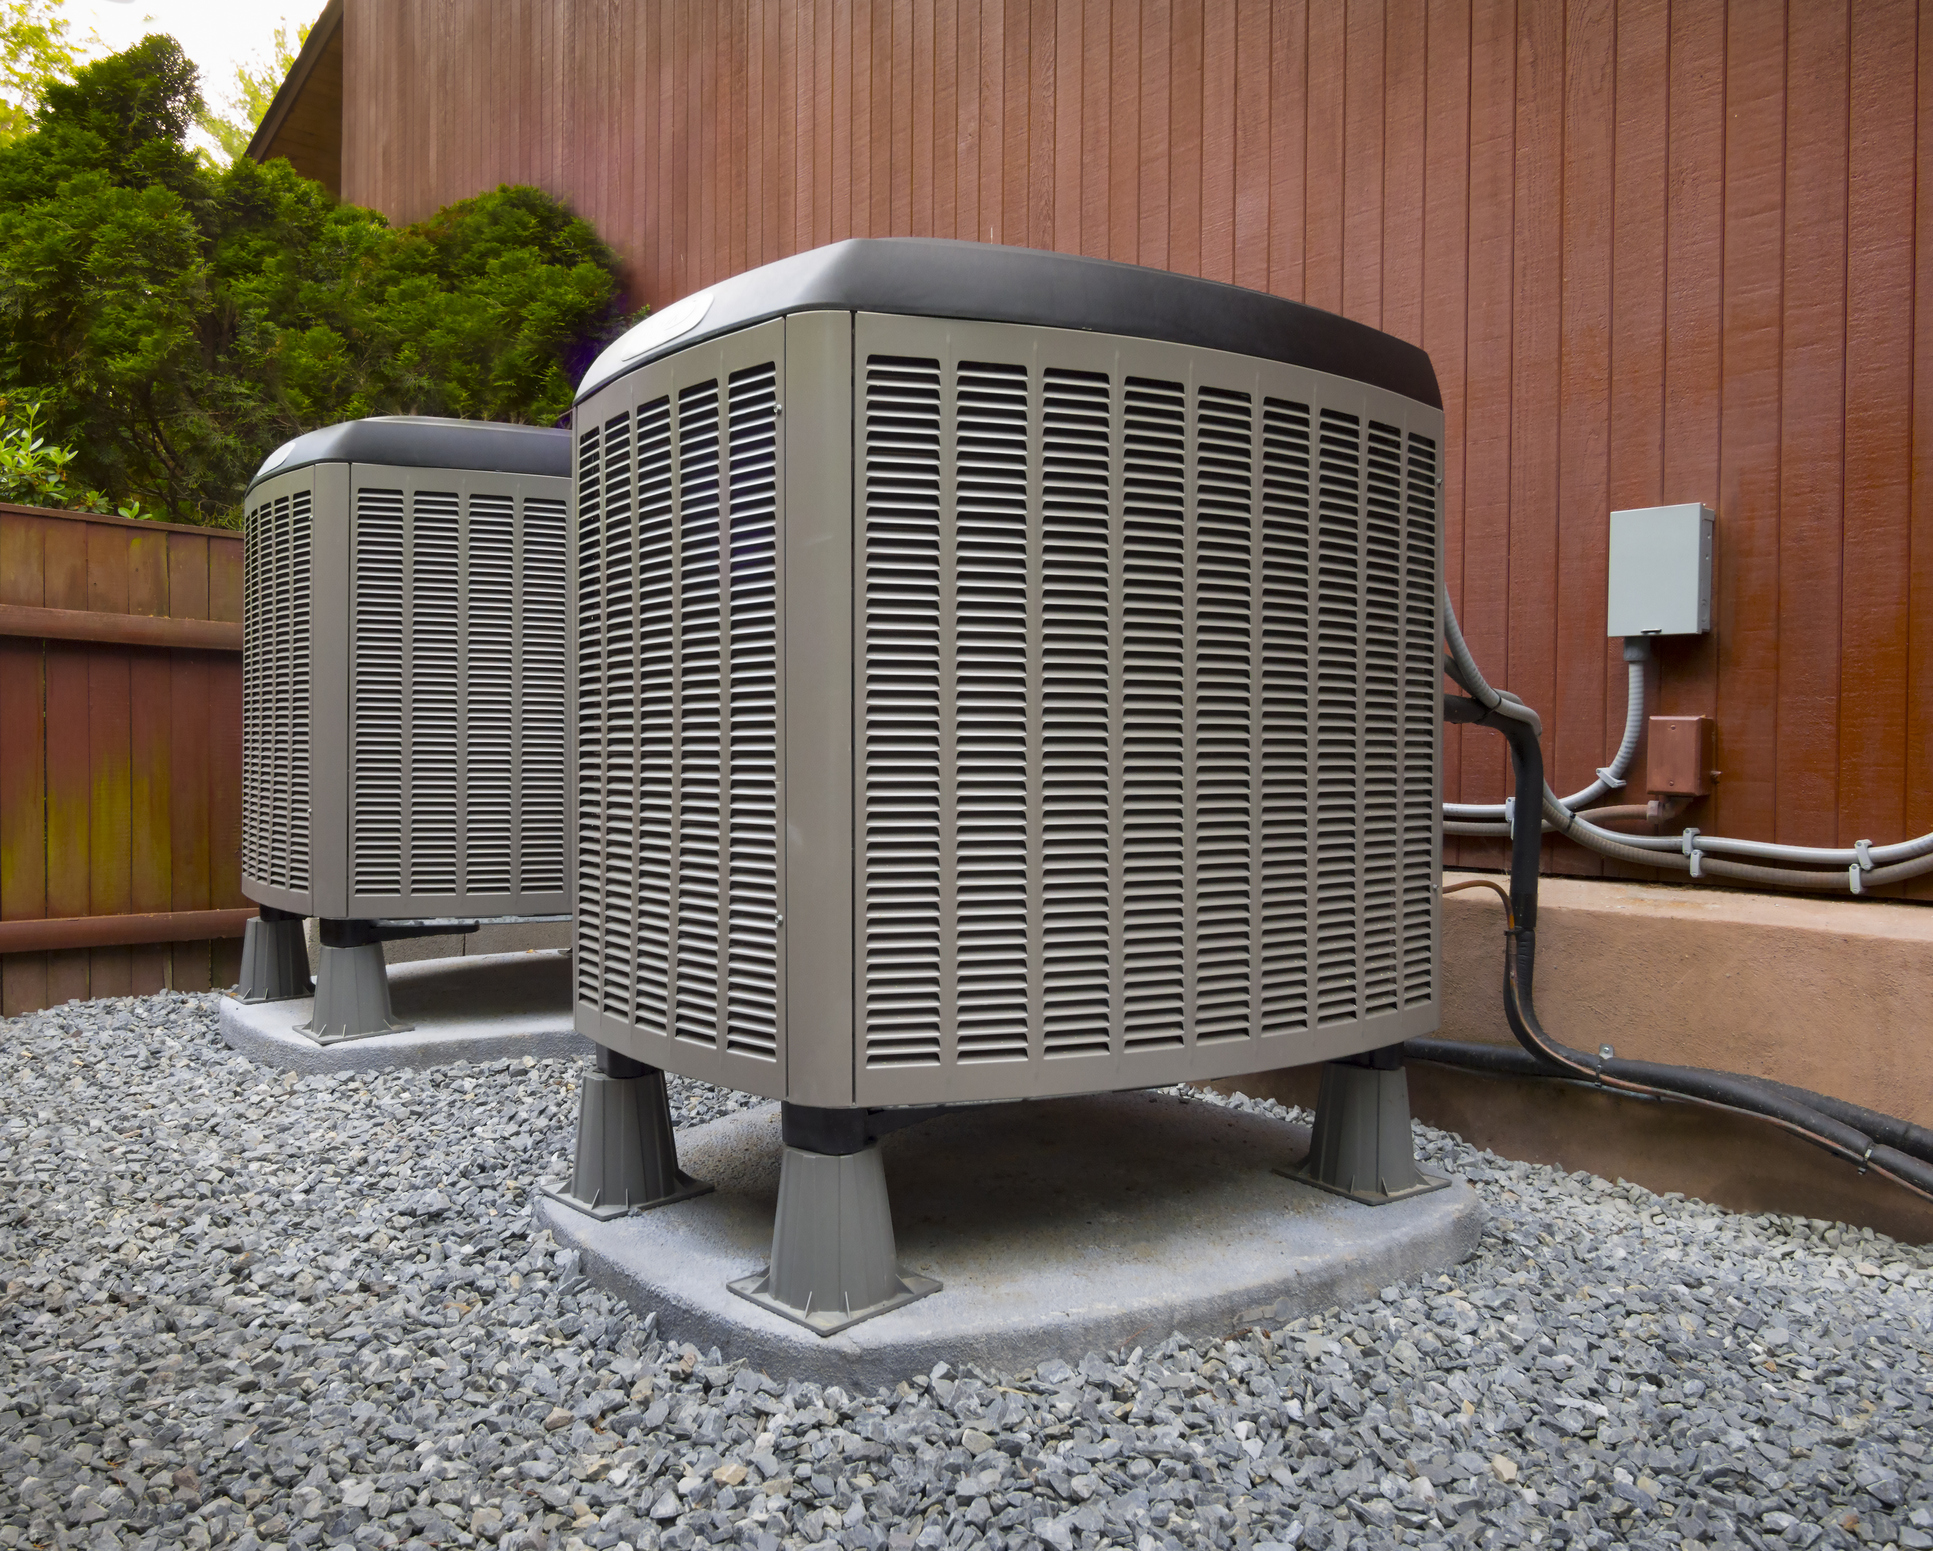 How VENTEC Refrigeration Can Prepare Your Air Conditioner for Summer